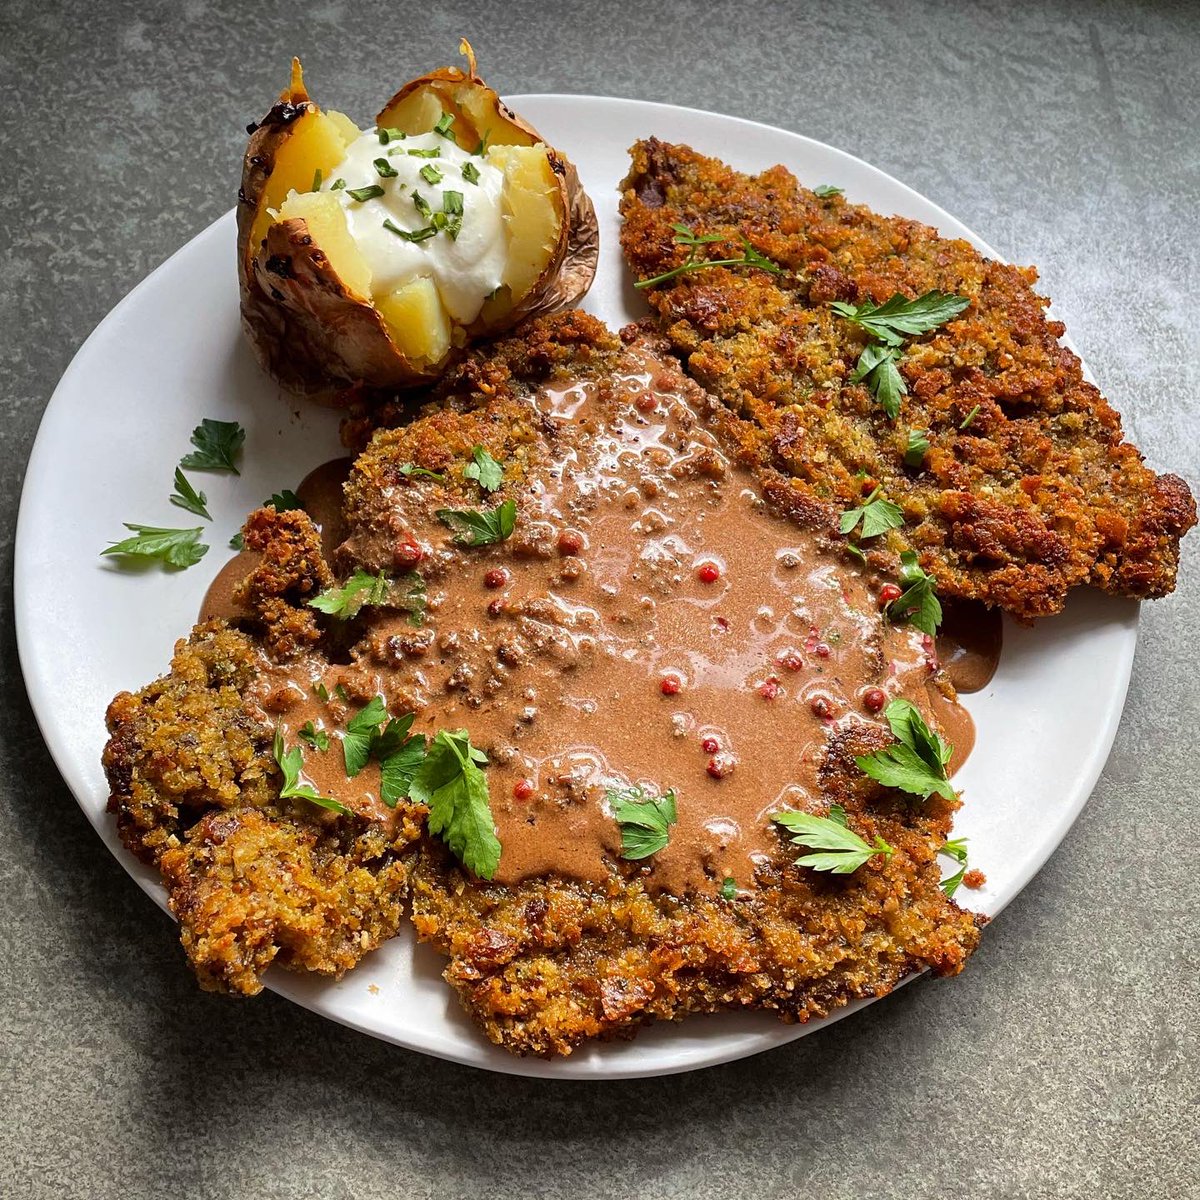 So, we’re a day late, but not to worry!

Here’s my (gigantic) #schnitty4sam supporting the great work of @Sammy_DF.

I’ve gone beef (yes, we’ve parked the parmi for a change) with a creamy pink peppercorn sauce.